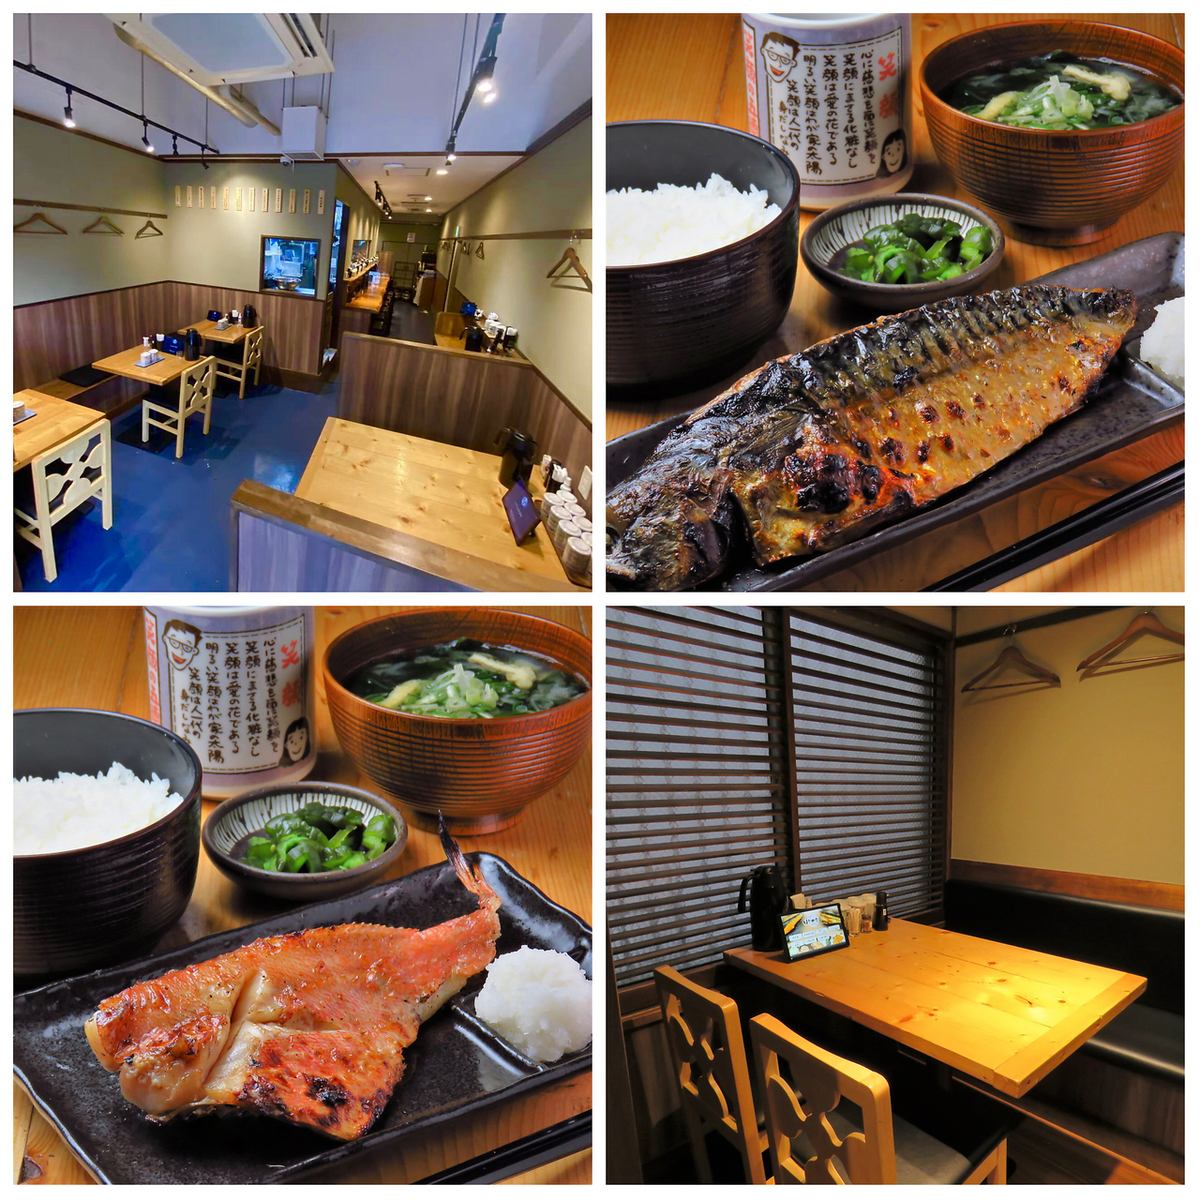 A 3-minute walk from Yotsuya Station, draft beer is exceptionally 200 yen! Charcoal-grilled + brown rice healthy Japanese restaurant ♪